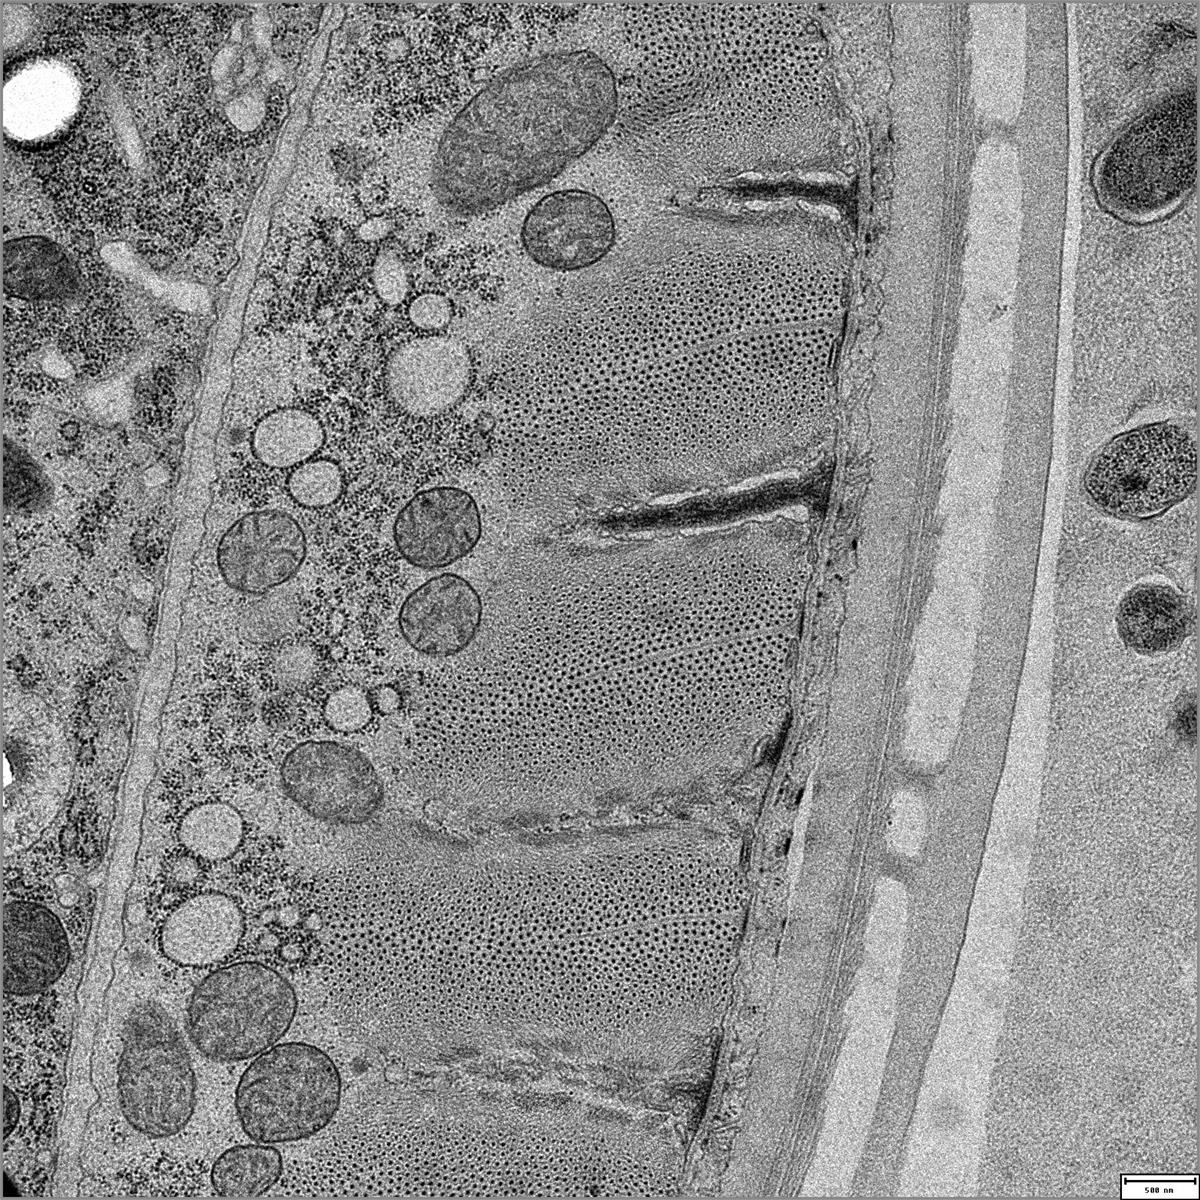 A transmission electron micrograph showing a healthy muscle cell in an adult Caenorhabditis elegans nematode.